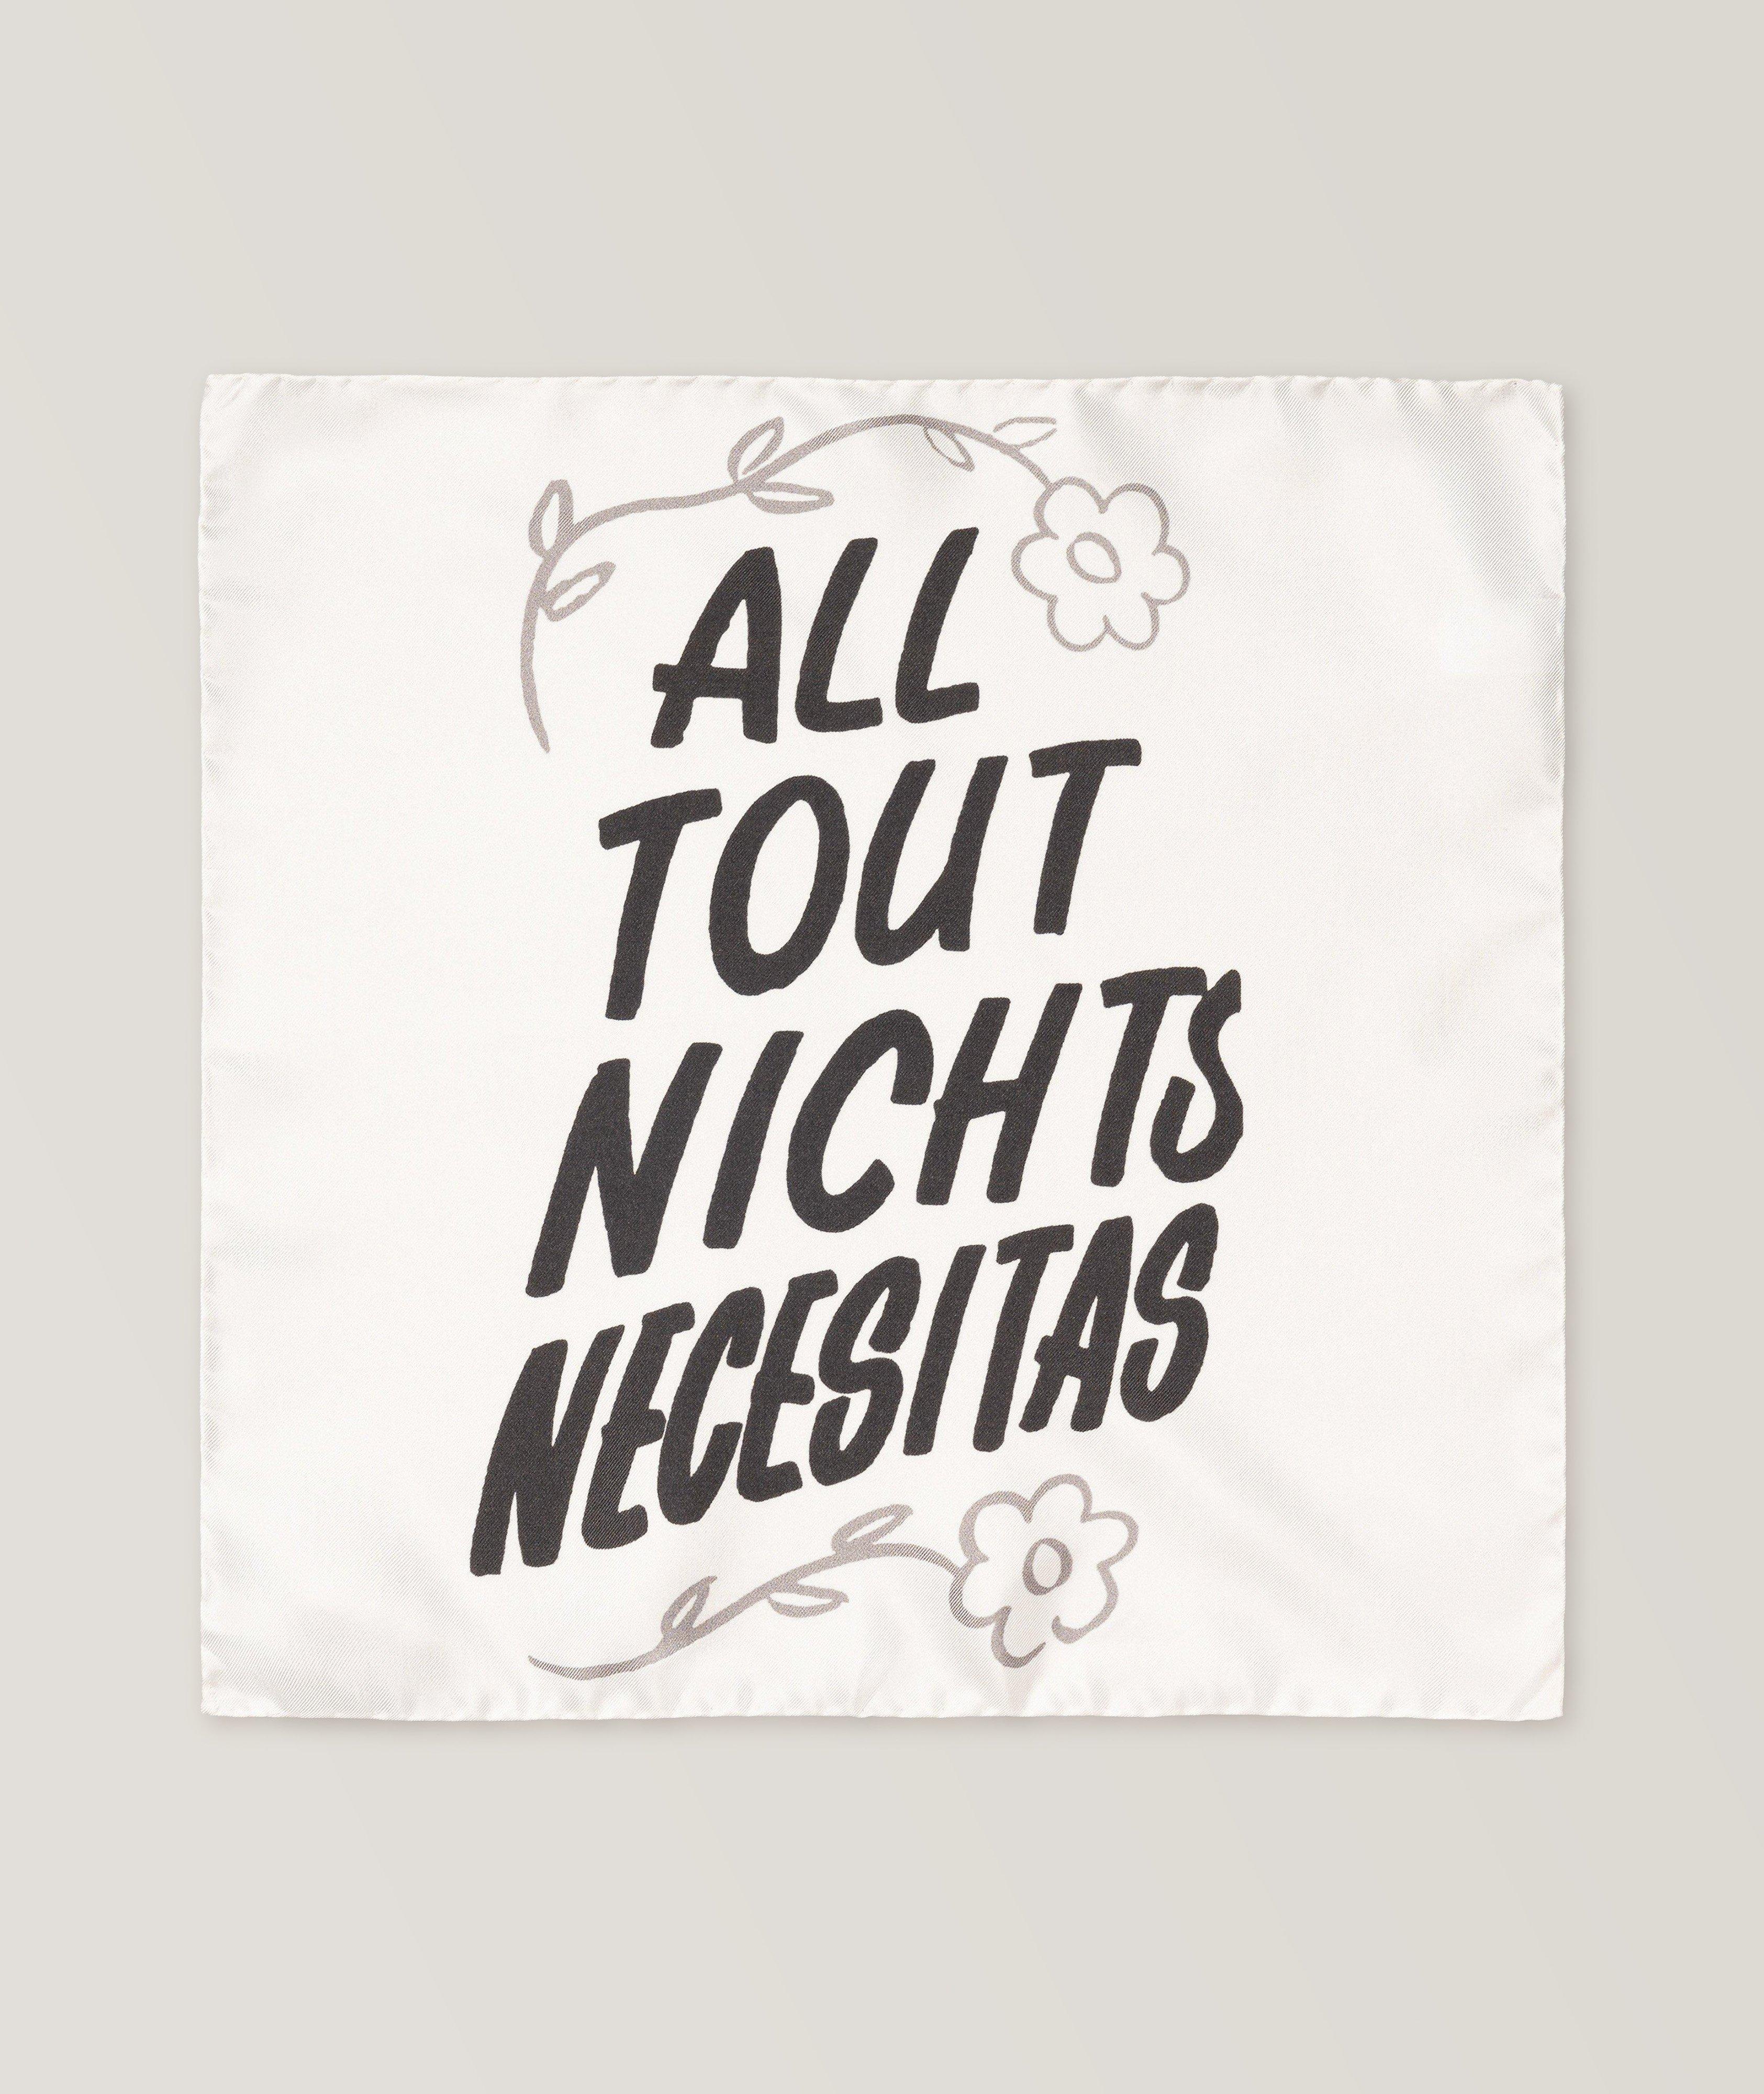 The Beatles Collection "All Tout Nichts Necesitas" Silk Pocket Square